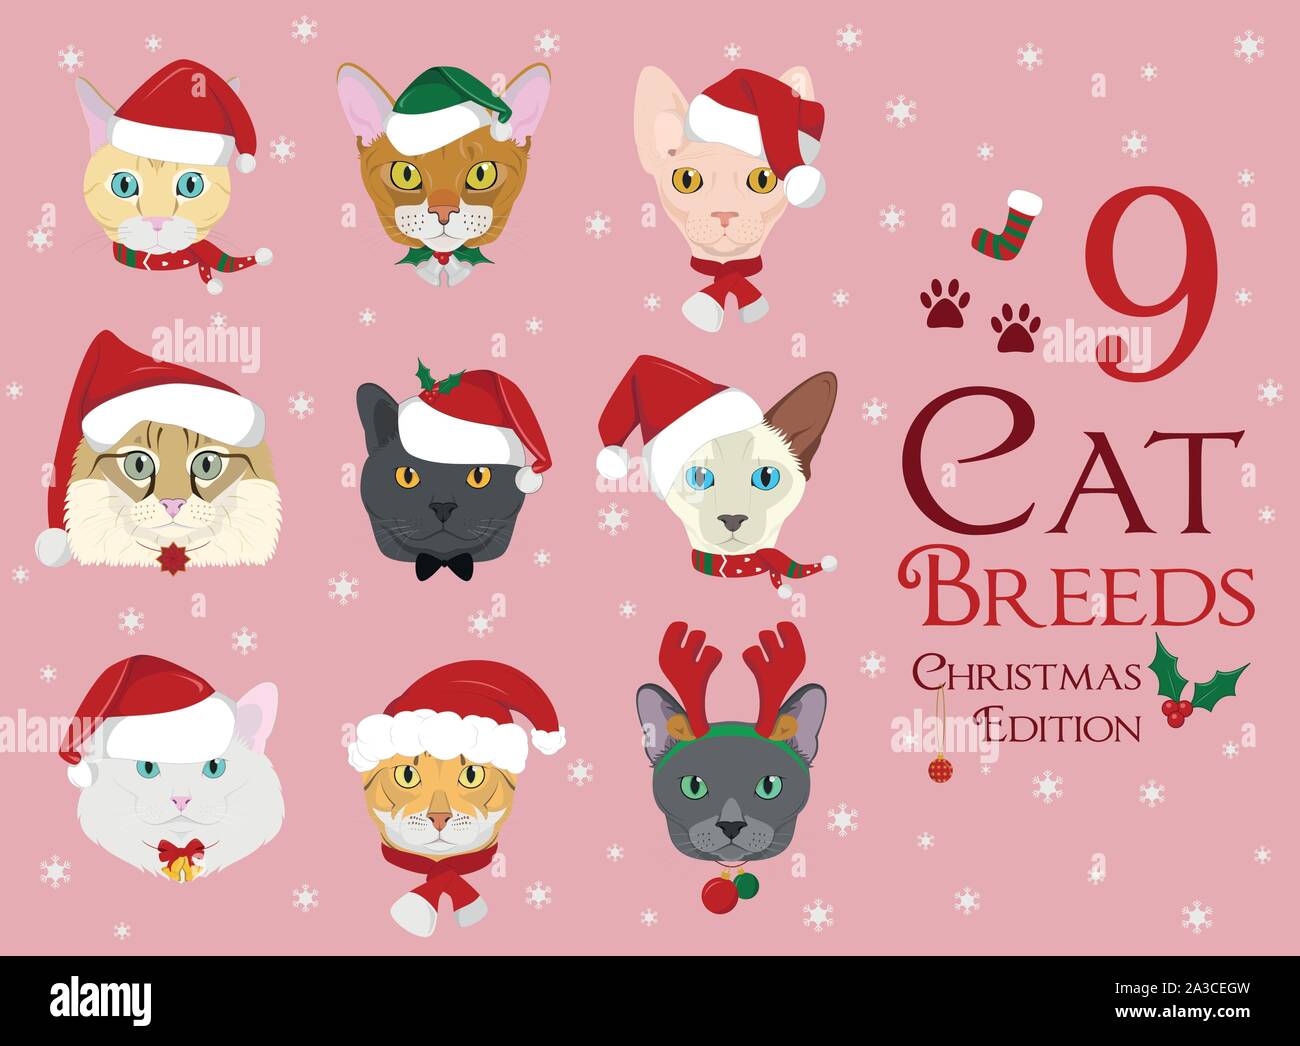 Set of 9 cat breeds with Christmas and winter themes Stock Vector